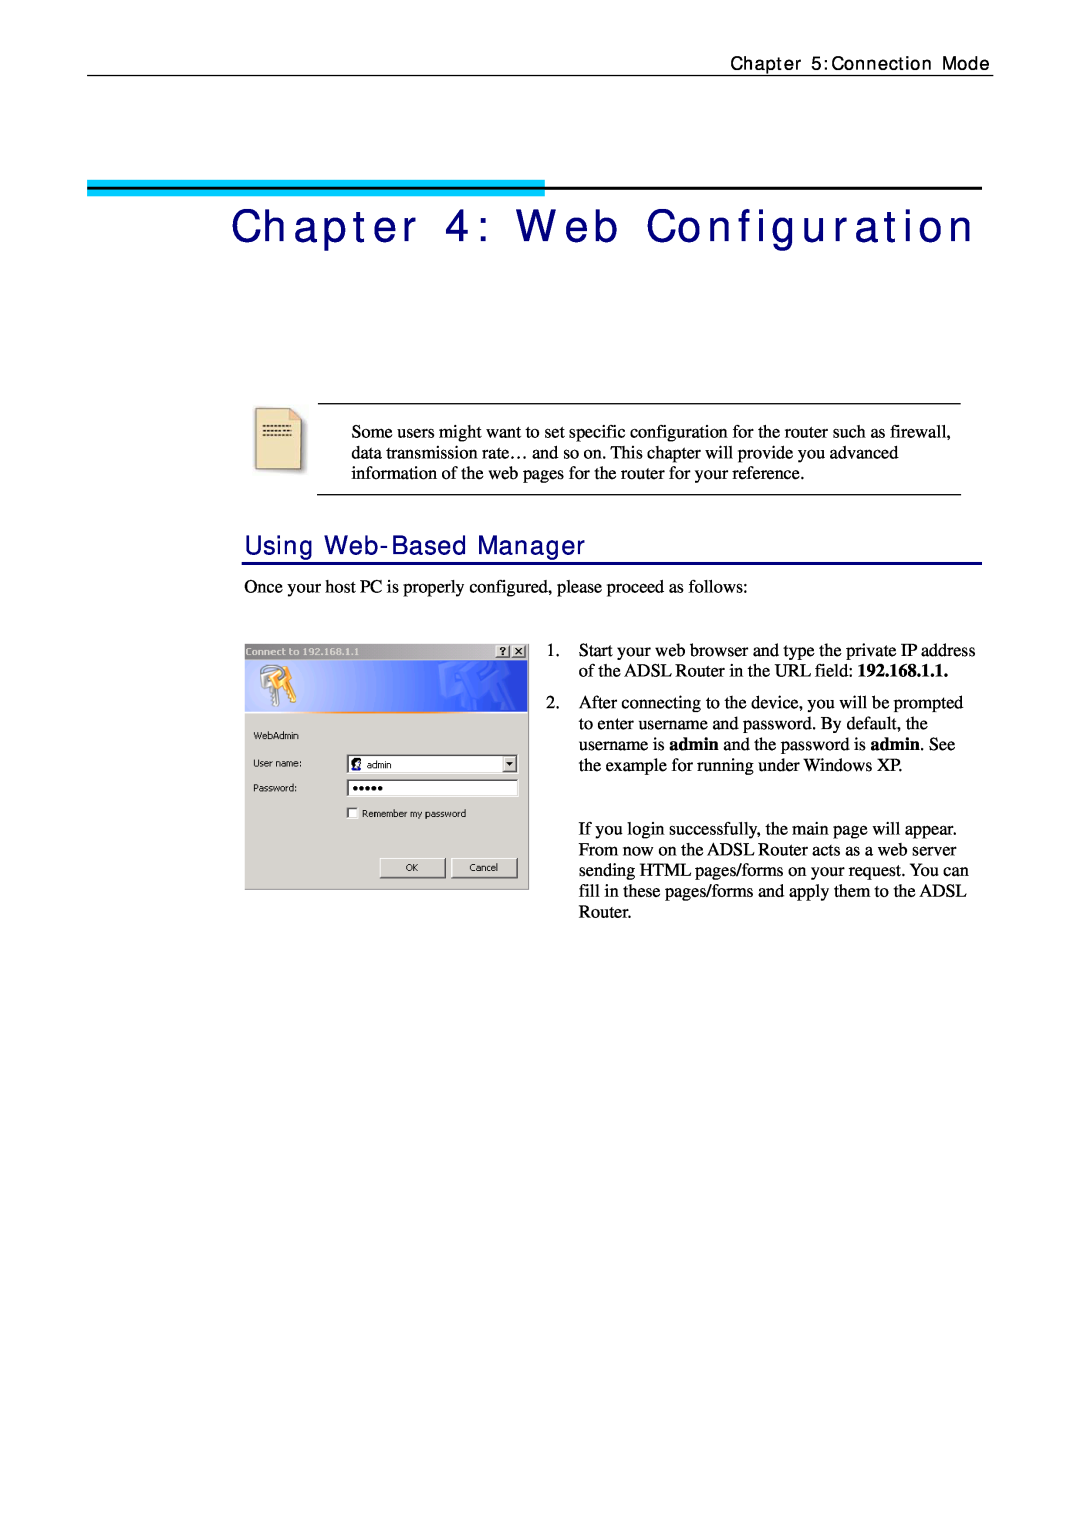 Siemens CL-010-I manual Web Configuration, Using Web-Based Manager 